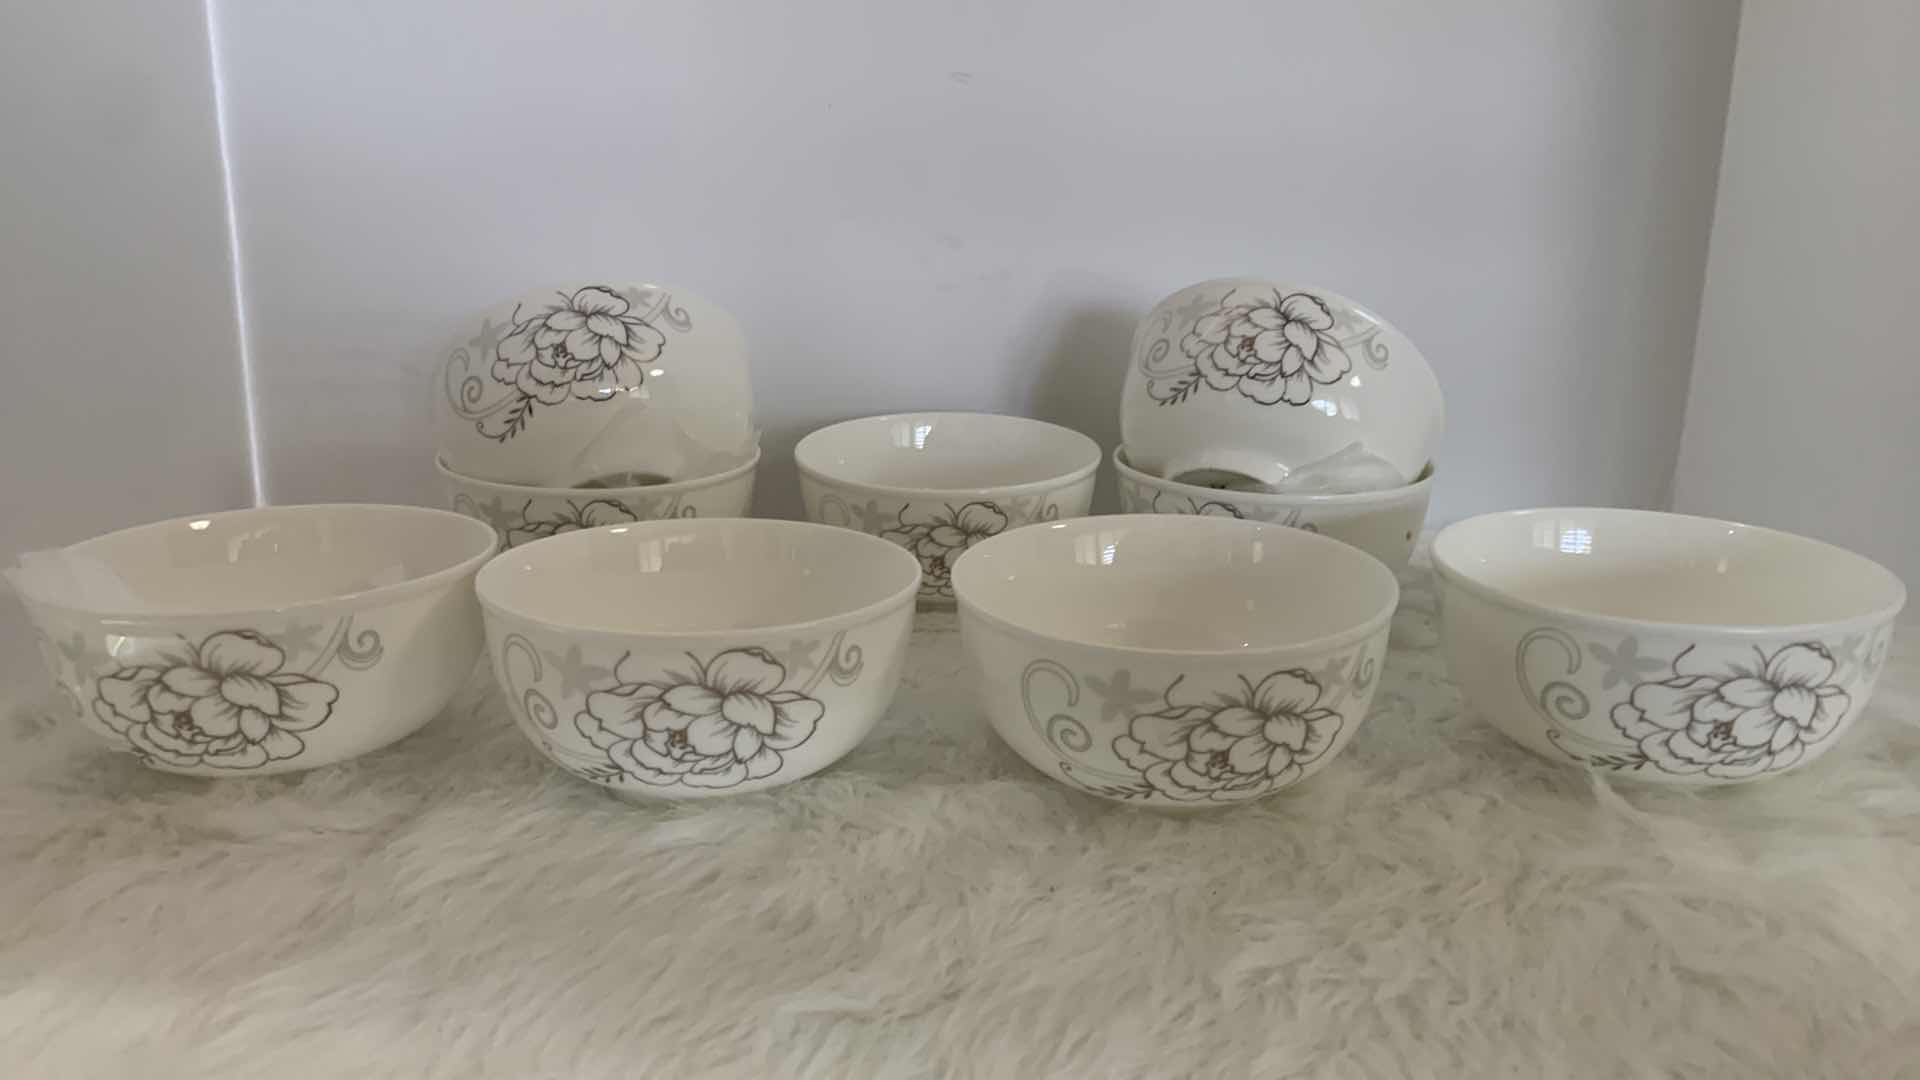 Photo 1 of 9 - SMALL WHITE PORCELAIN DESSERT BOWLS WITH FLOWER